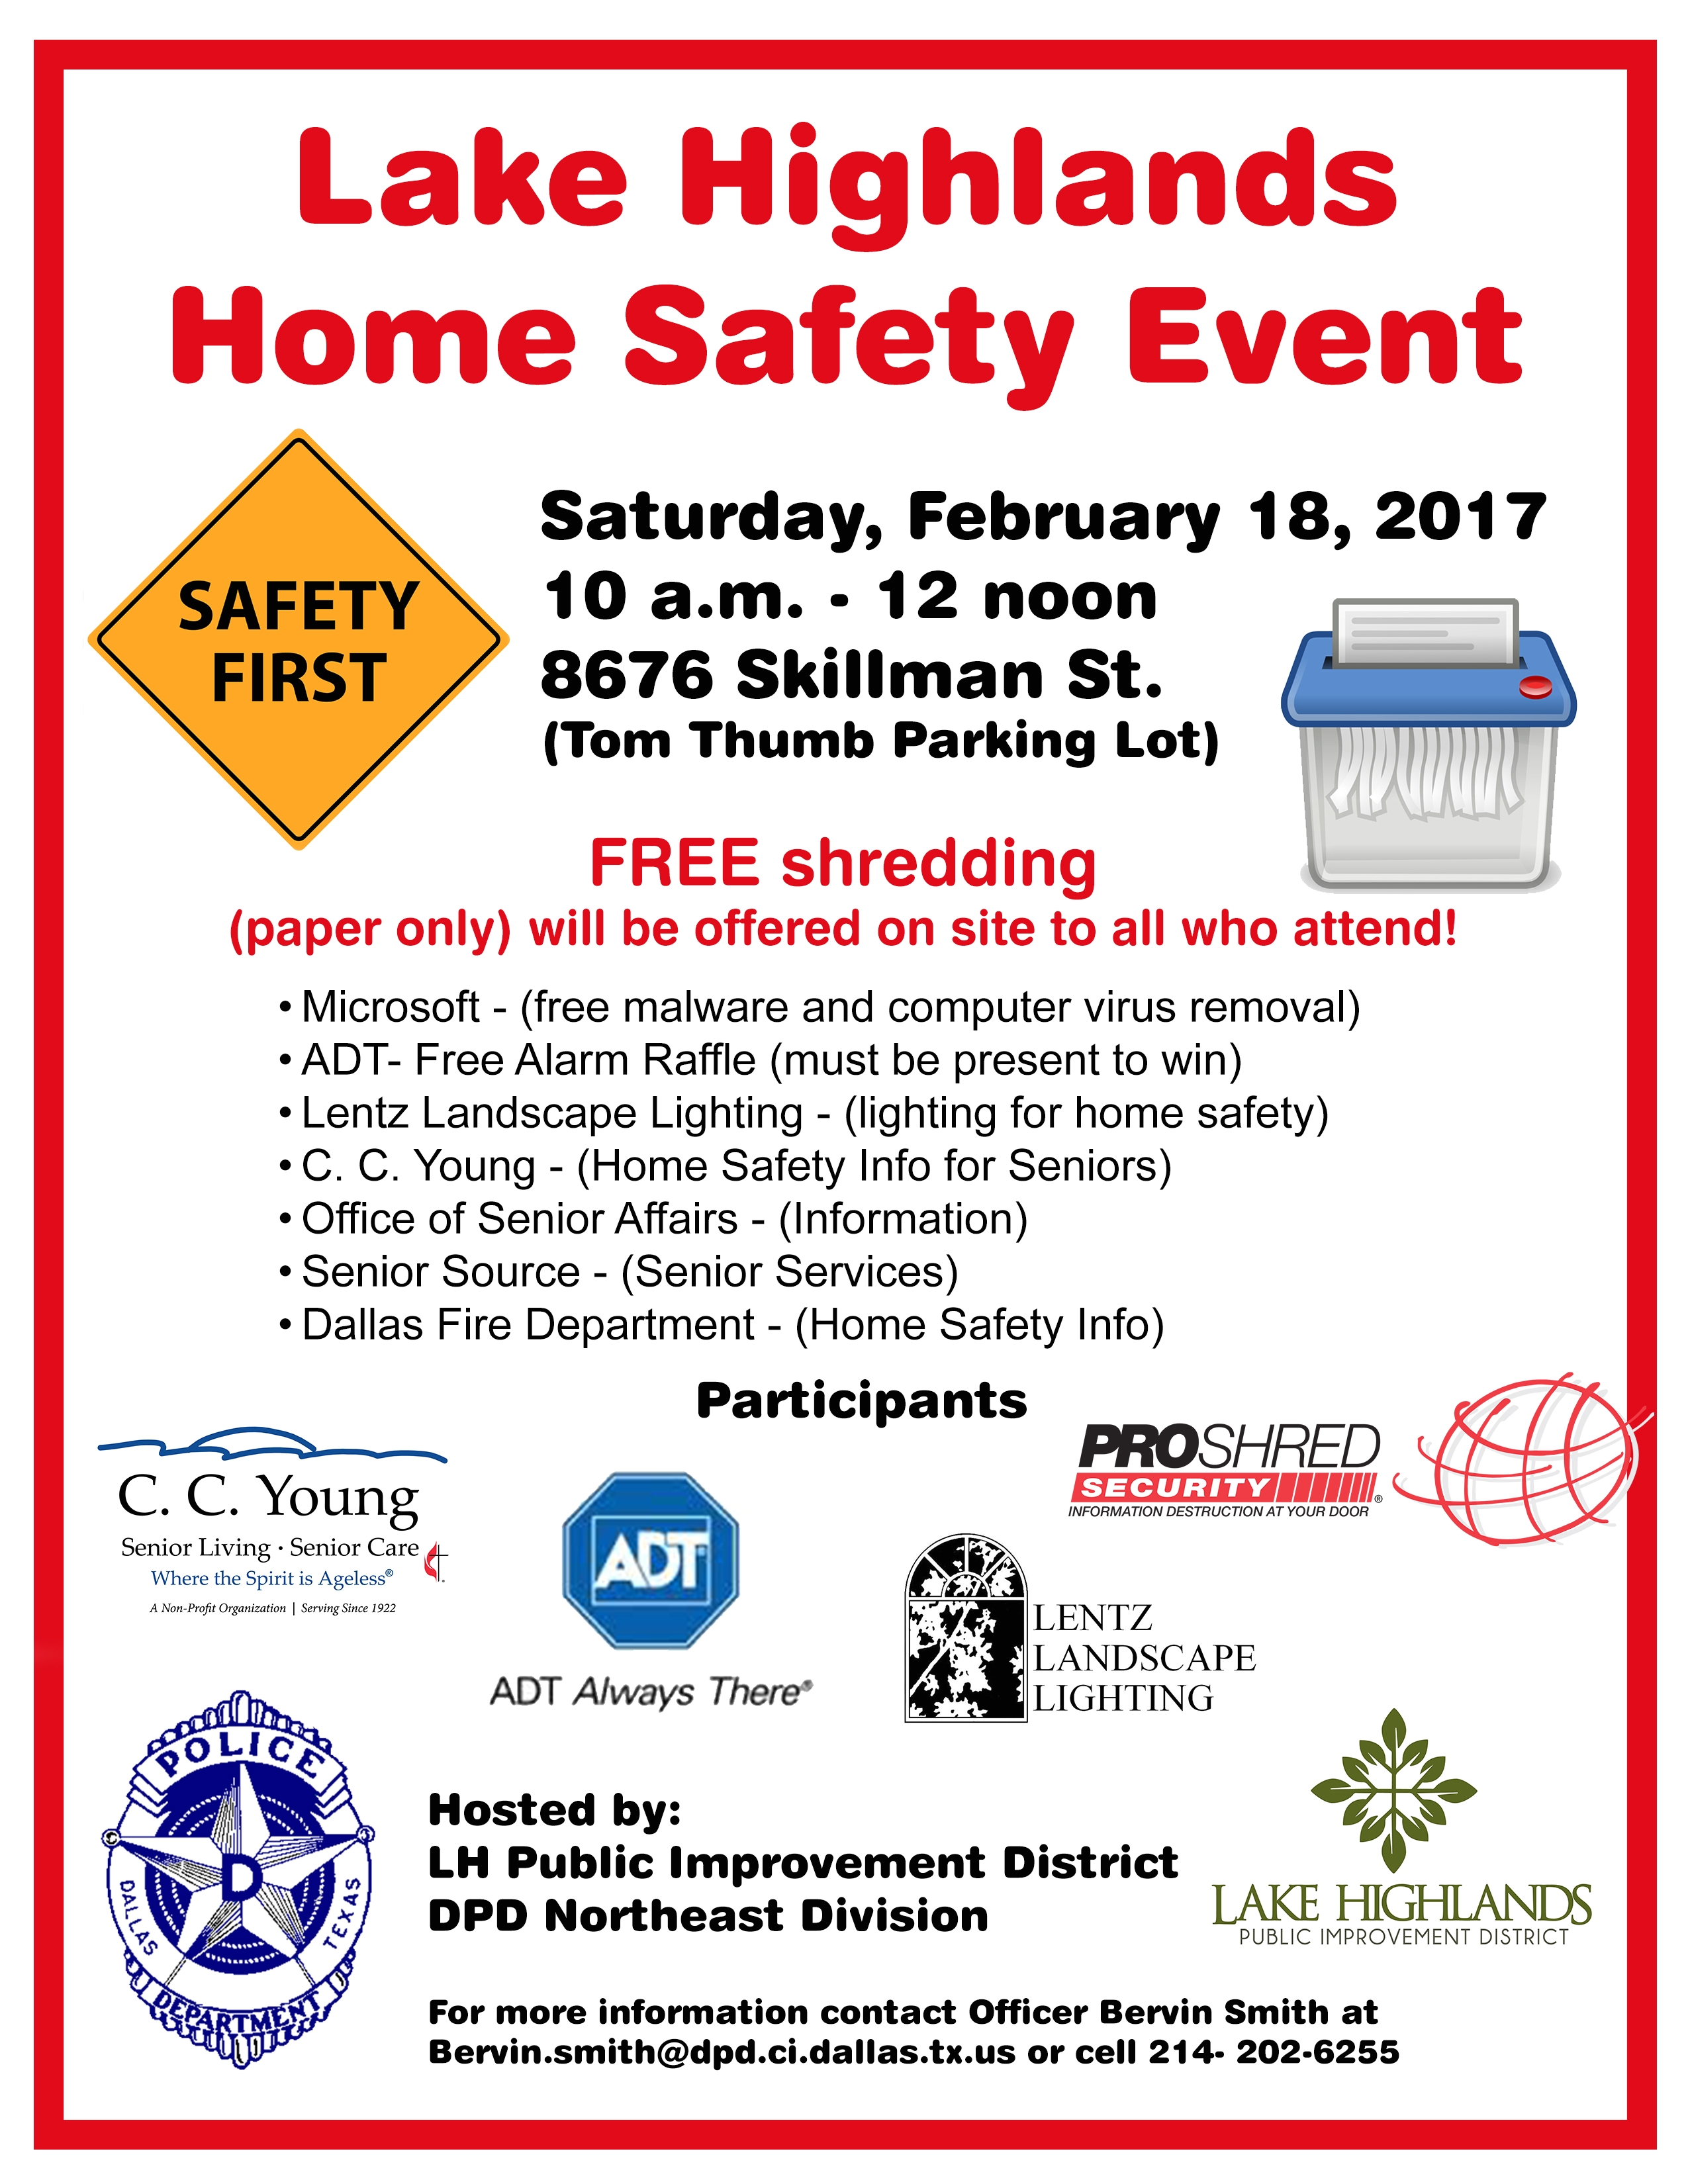 safety event flyer 2017 3